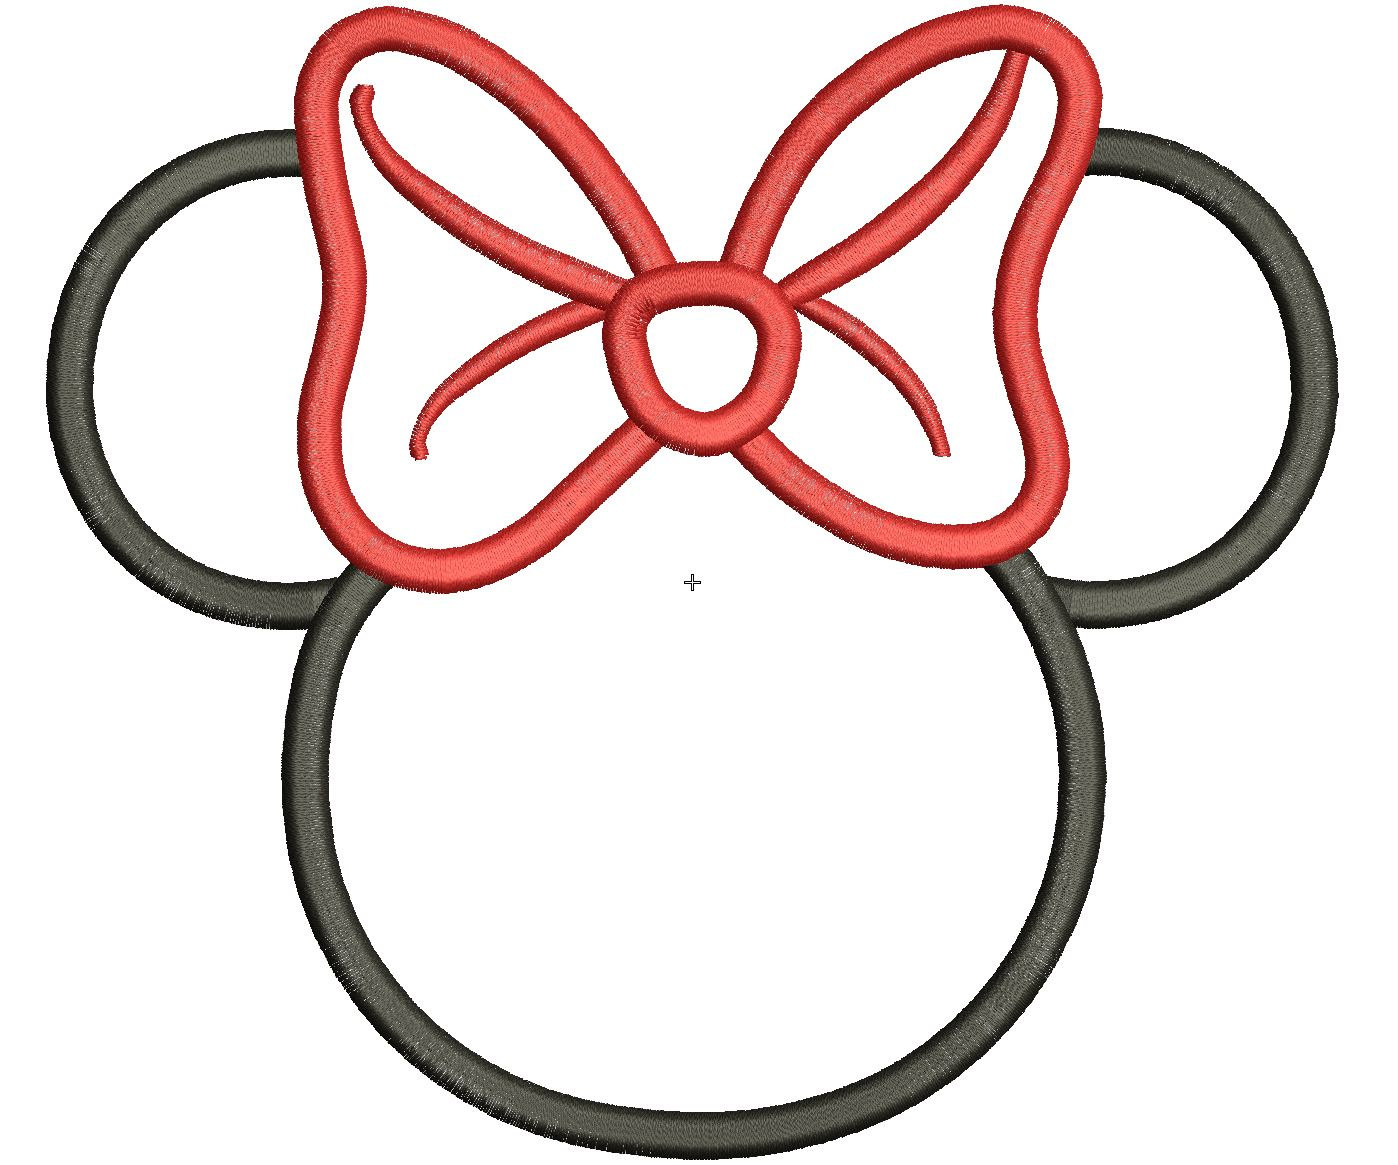 Minnie mouse head 3 cliparts 4